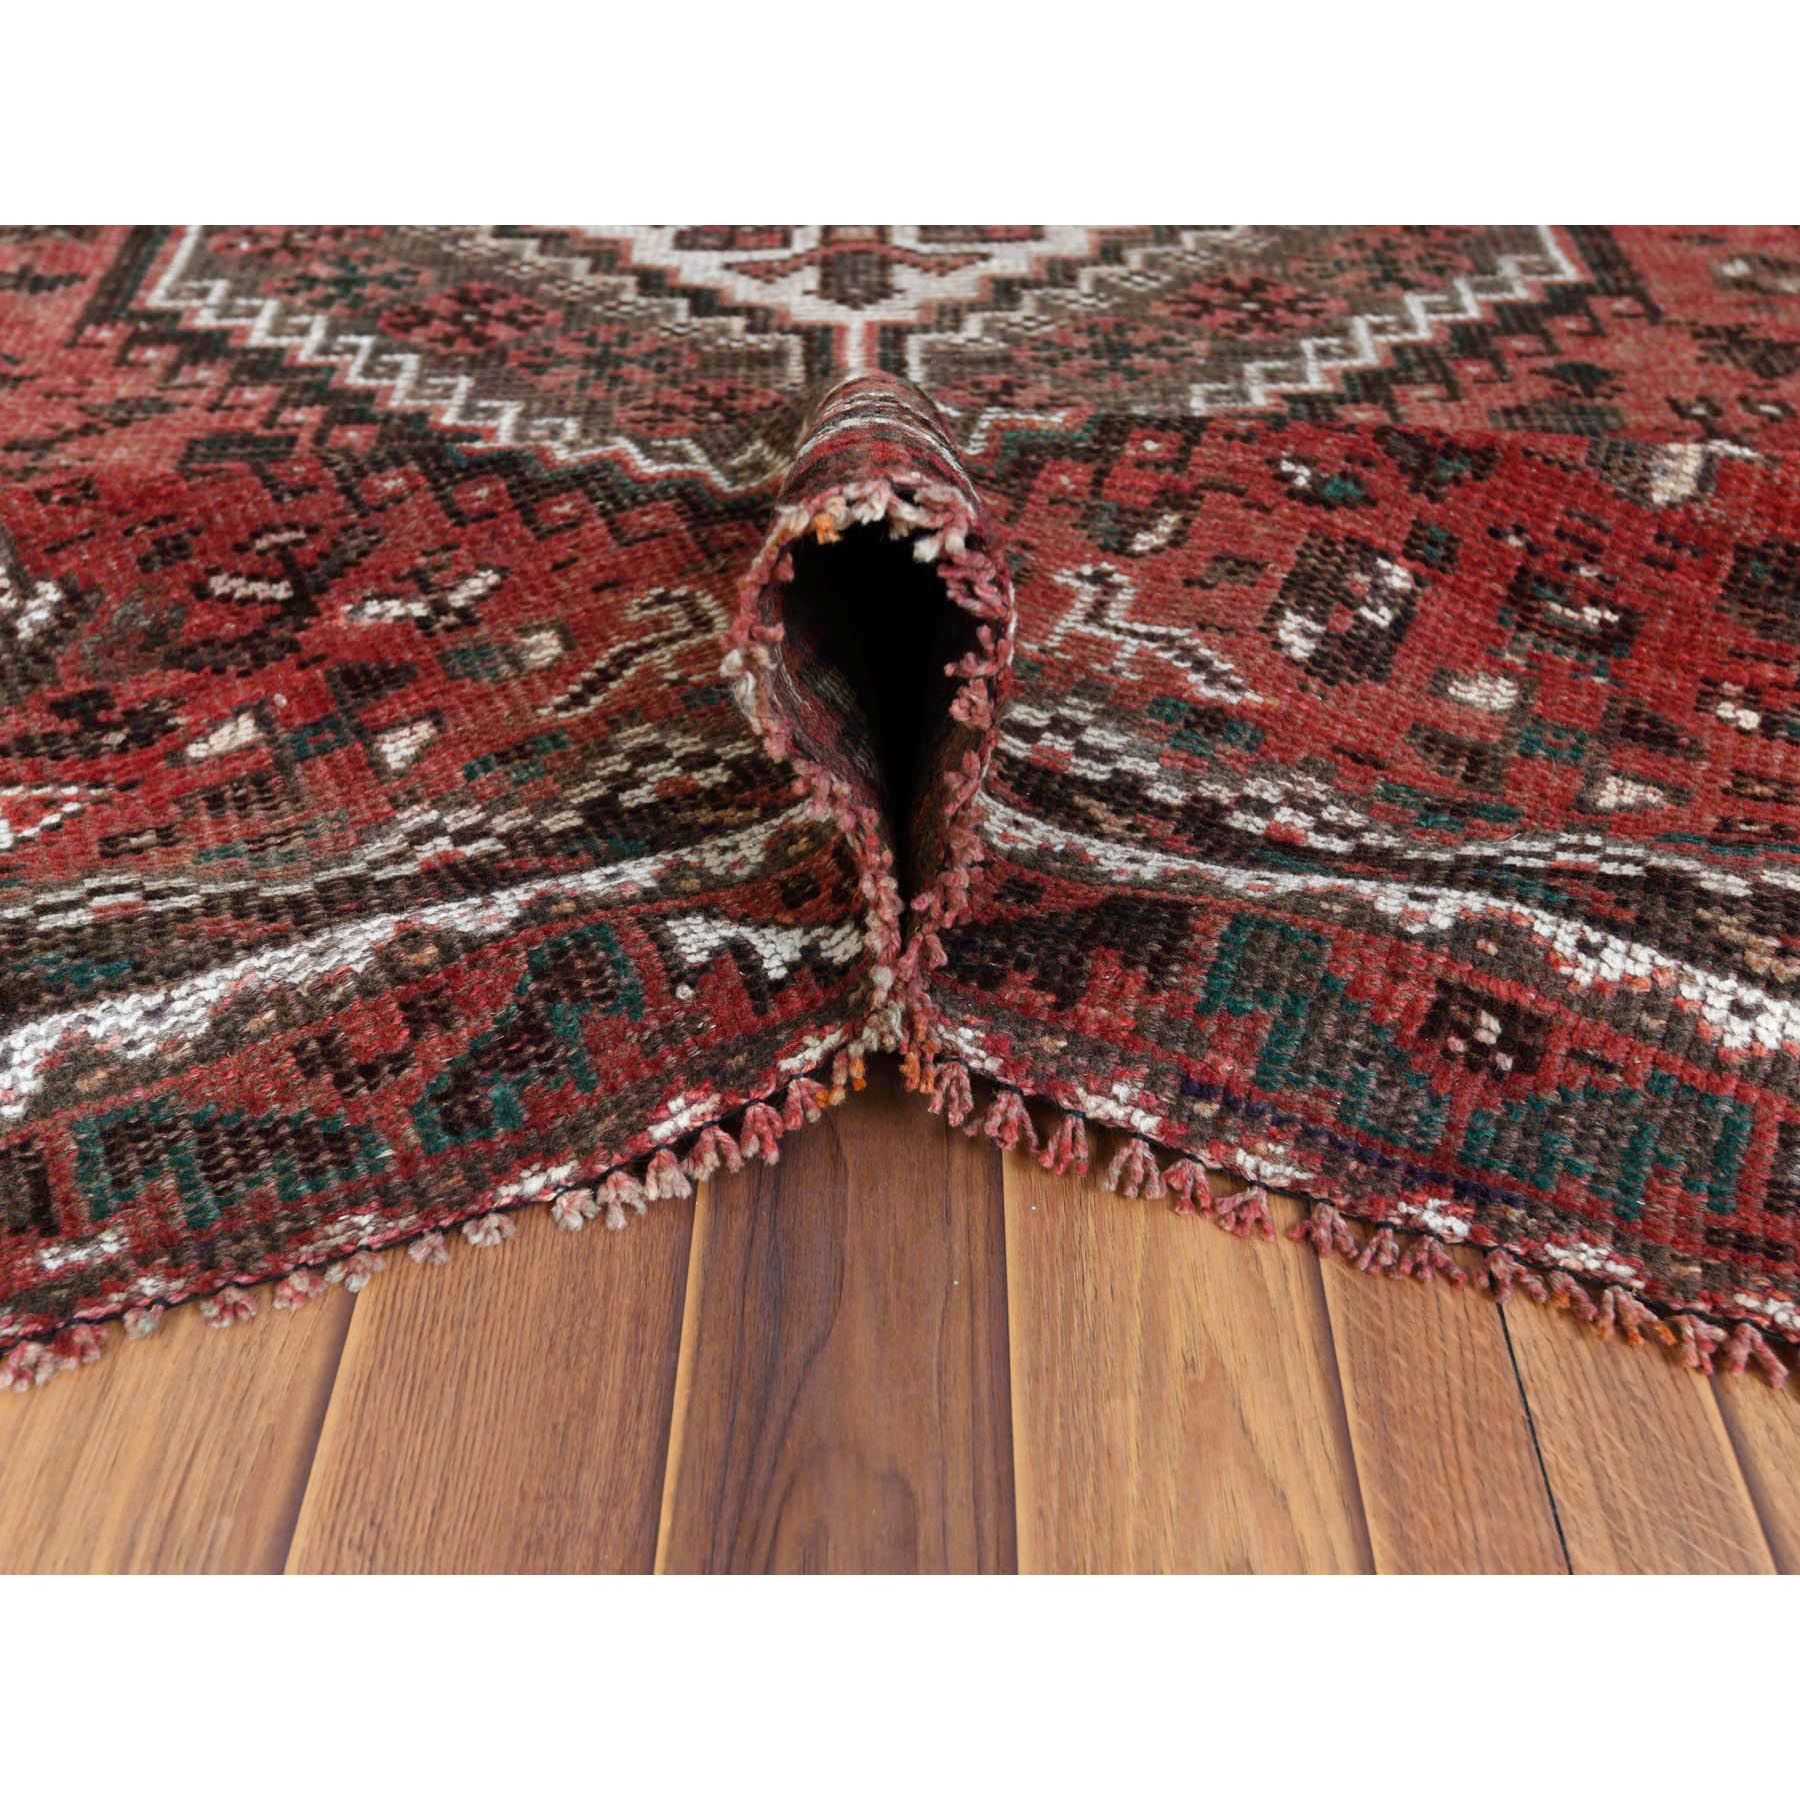 6'9"x9'6" Red Vintage and Worn Down Geometric Design Persian Shiraz Clean Hand Woven Oriental Rug 